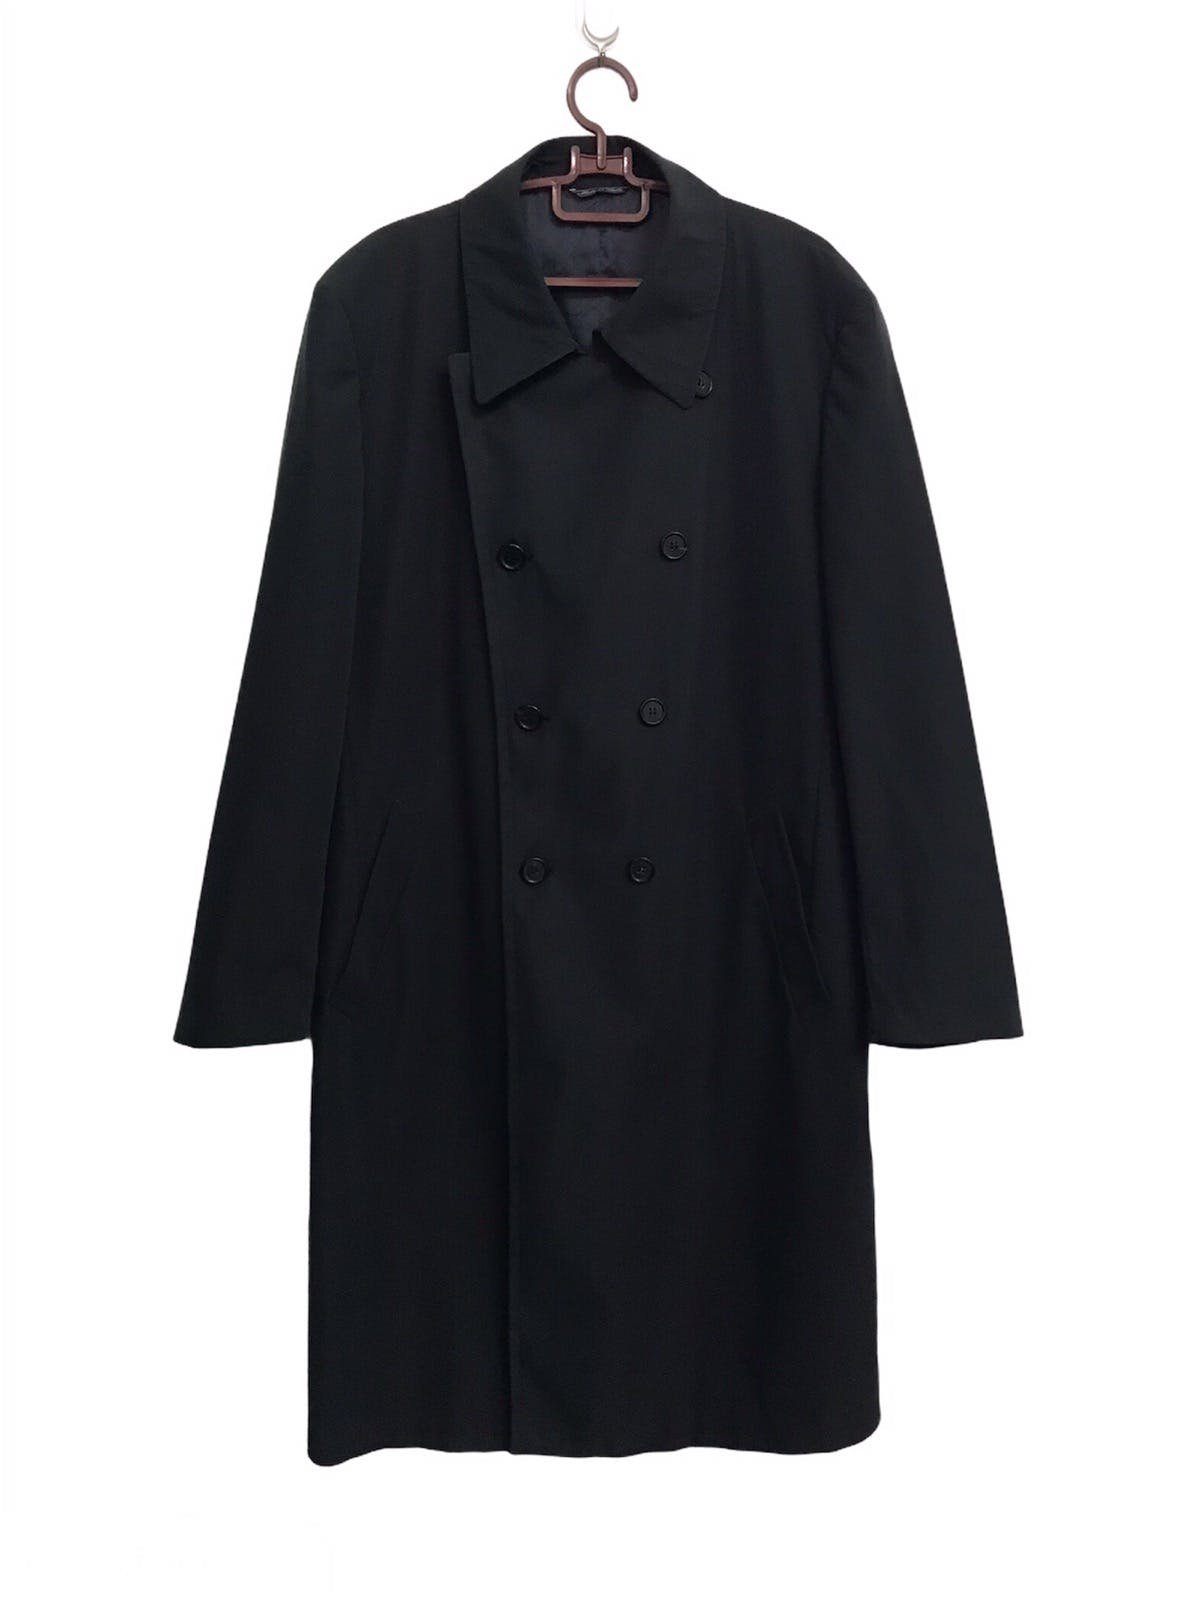 Gucci Long Coat/Jacket Made in Italy - 1